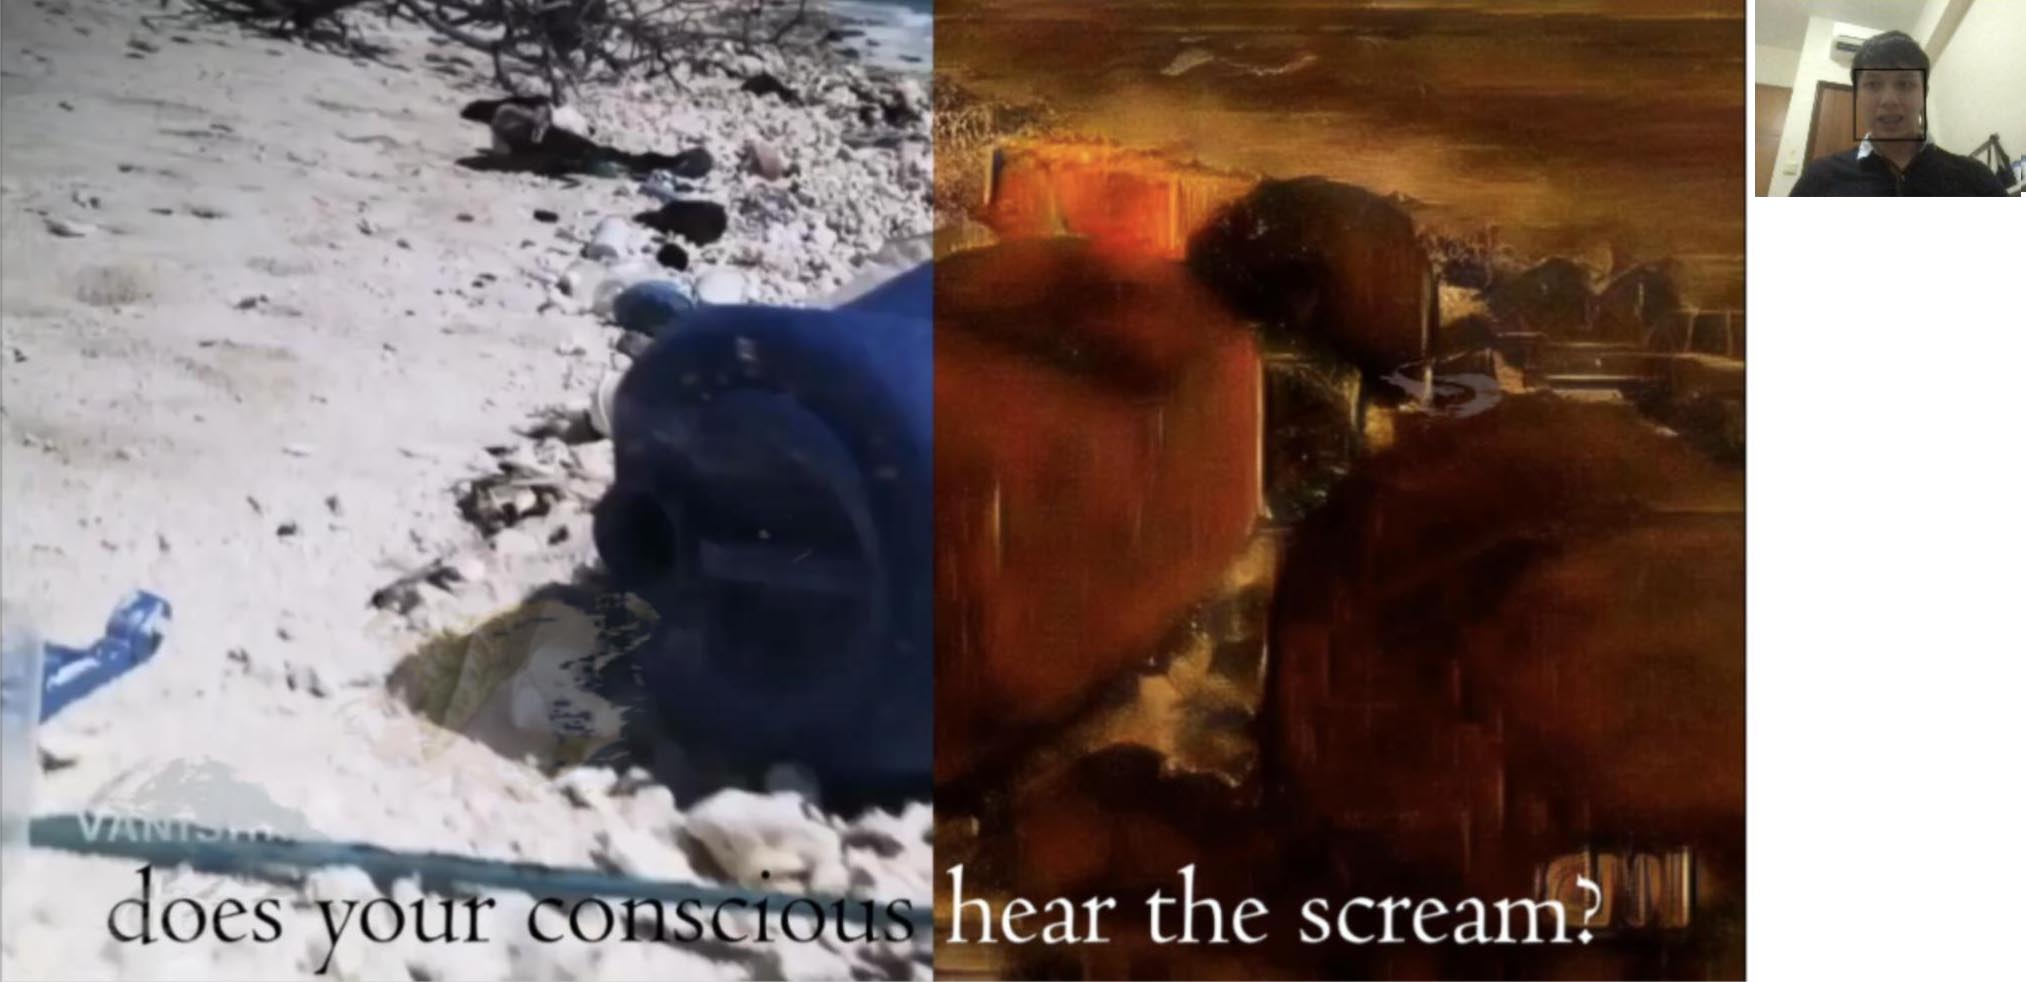 A video still of a rock, the frame divided with the right side filtered by a red overlay, overlaid again by text saying “does your conscious hear the scream?”, next to which is a human face whose movements are being monitored